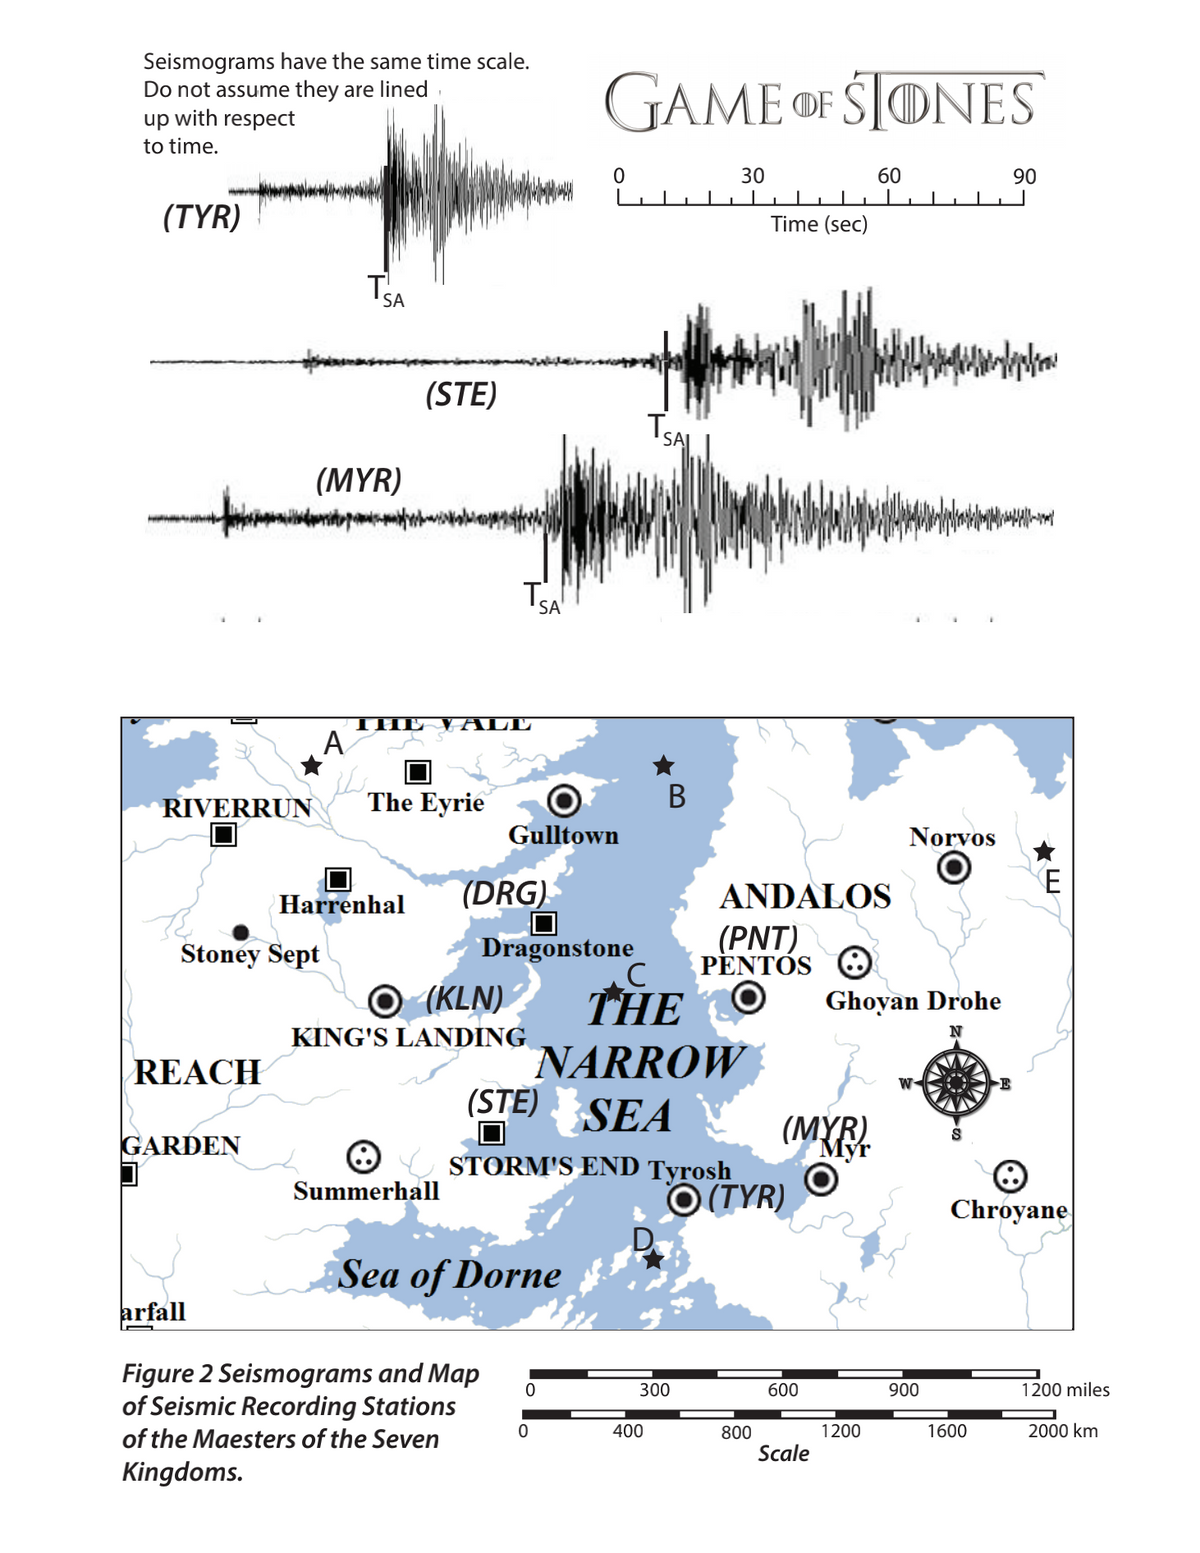 Seismograms have the same time scale.
Do not assume they are lined
up with respect
GAME OF ŚIONES
to time.
30
60
90
(TYR)
Time (sec)
TSA
(STE)
TSAI
(MYR)
SA
THE V ALL
A
RIVERRUN
The Eyrie
В
Gulltown
Norvos
(DRG)
ANDALOS
Harrenhal
Stoney Sept
Dragonstone
(PNT)
PENTÓS O
O (KLN)
THE
Ghoyan Drohe
KING'S LANDING
NARROW
(STE) SEA
REACH
w-
GARDEN
(MYR)
Myr
STORM'S END Tyrosh
O (TYR)
Summerhall
Chroyane
Sea of Dorne
arfall
Figure 2 Seismograms and Map
of Seismic Recording Stations
300
600
900
1200 miles
of the Maesters of the Seven
400
800
1200
1600
2000 km
Scale
Kingdoms.
